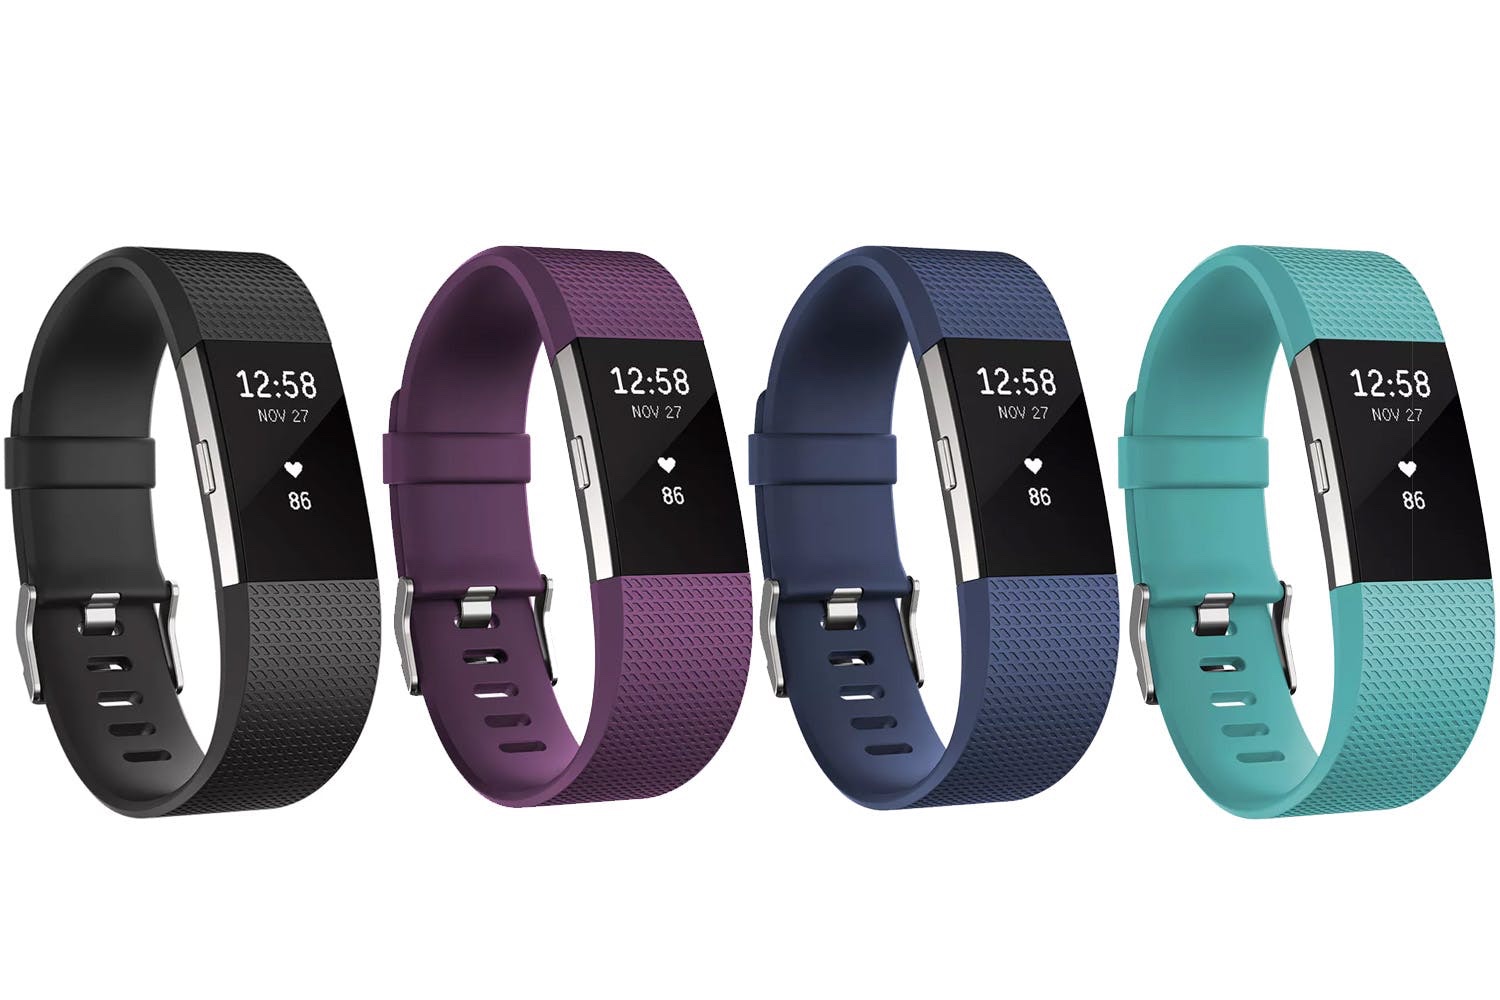 Global fitness trackers market predicted to have CAGR of 19.6% through 2023